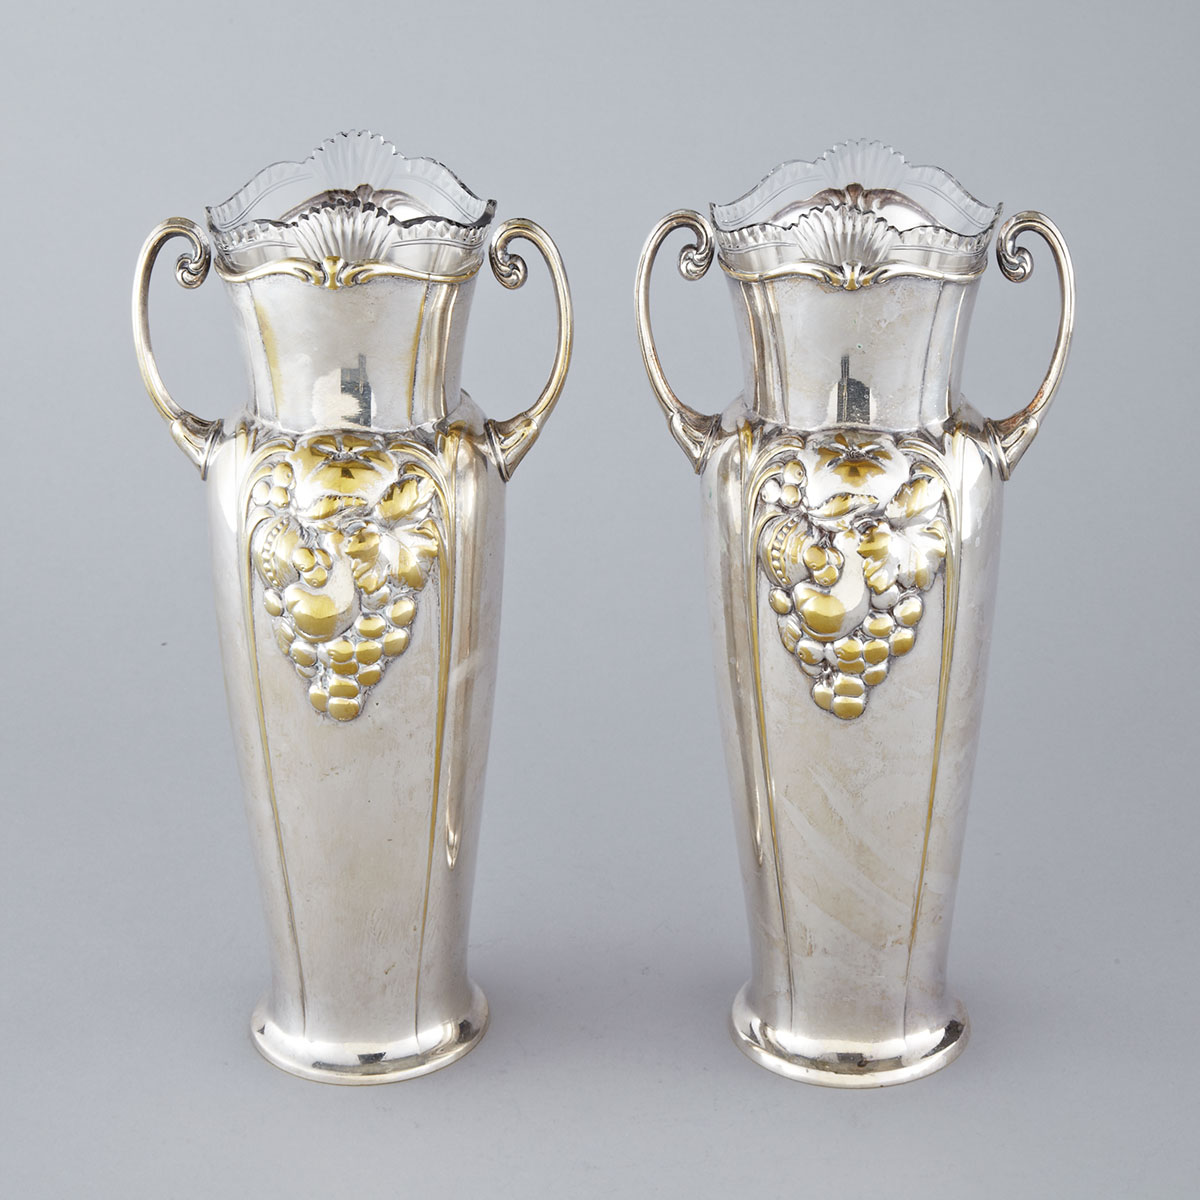 Pair of WMF Silver Plate and Cut Glass Vases, c.1900